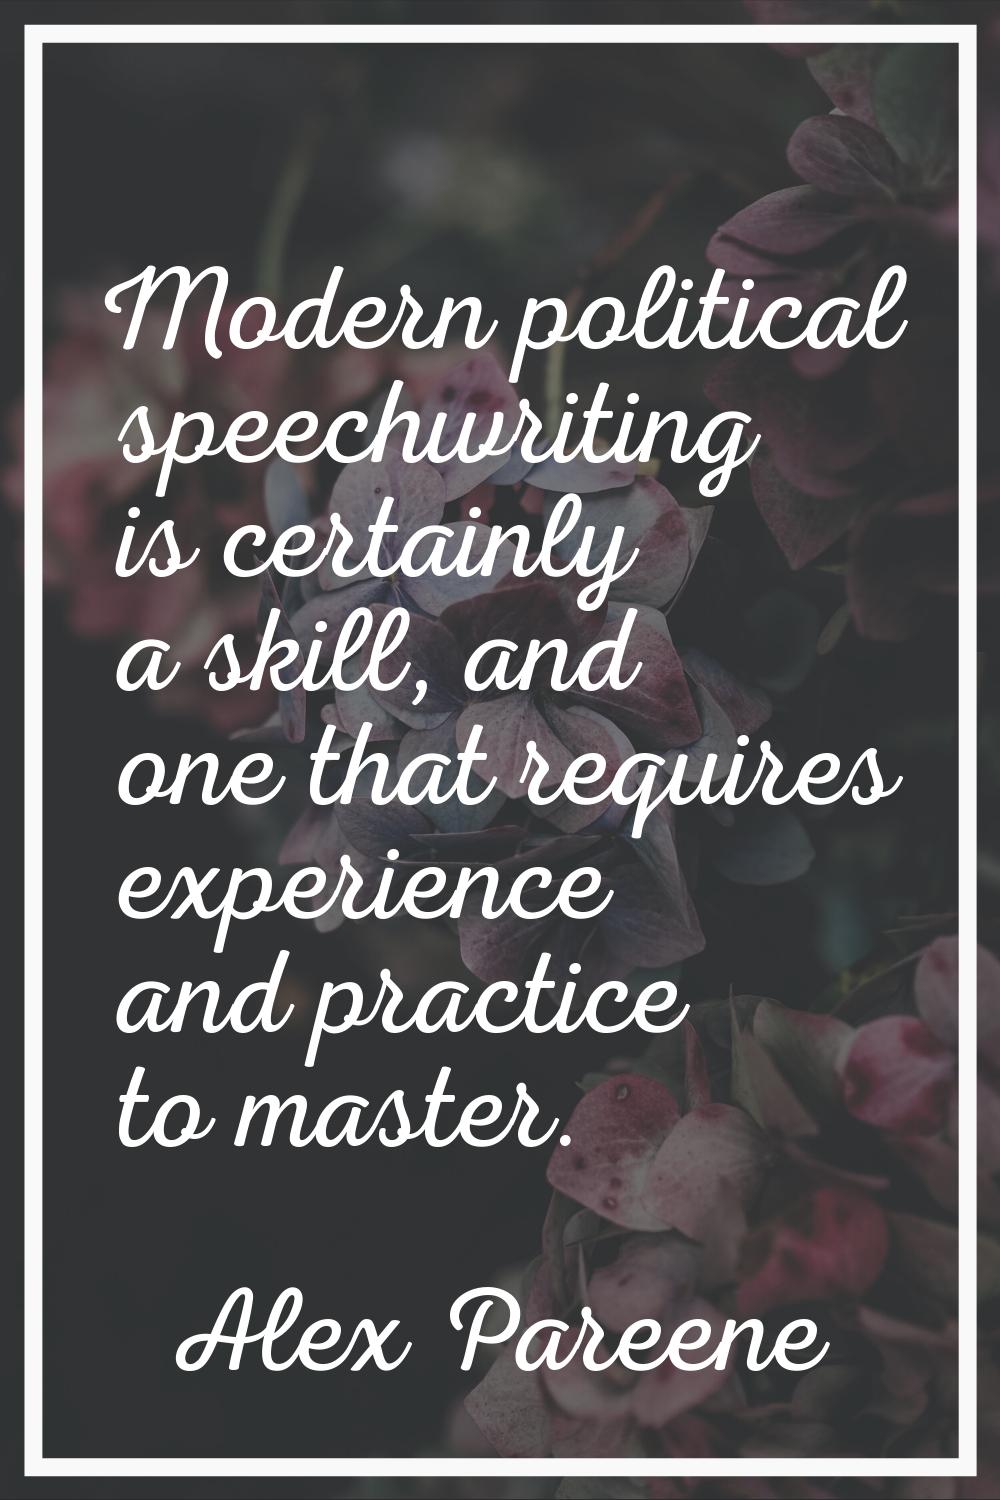 Modern political speechwriting is certainly a skill, and one that requires experience and practice 